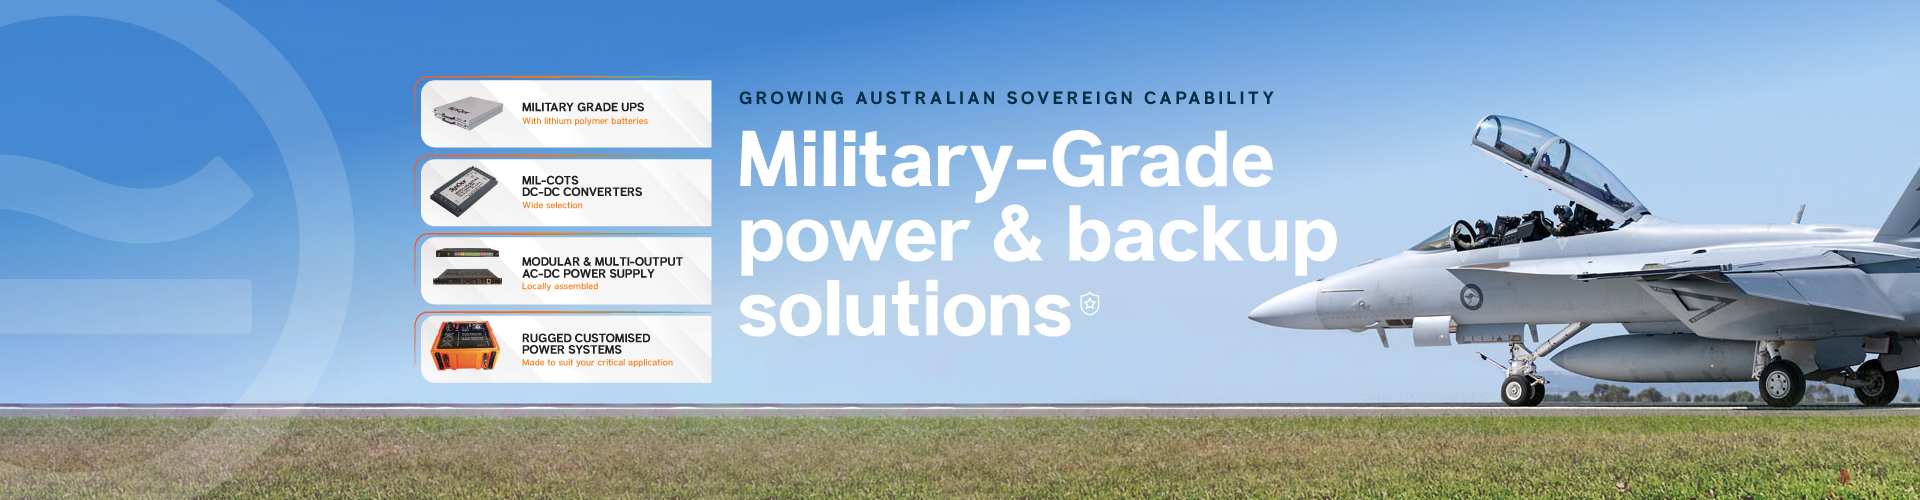 Military grade power and backup solutions Australia